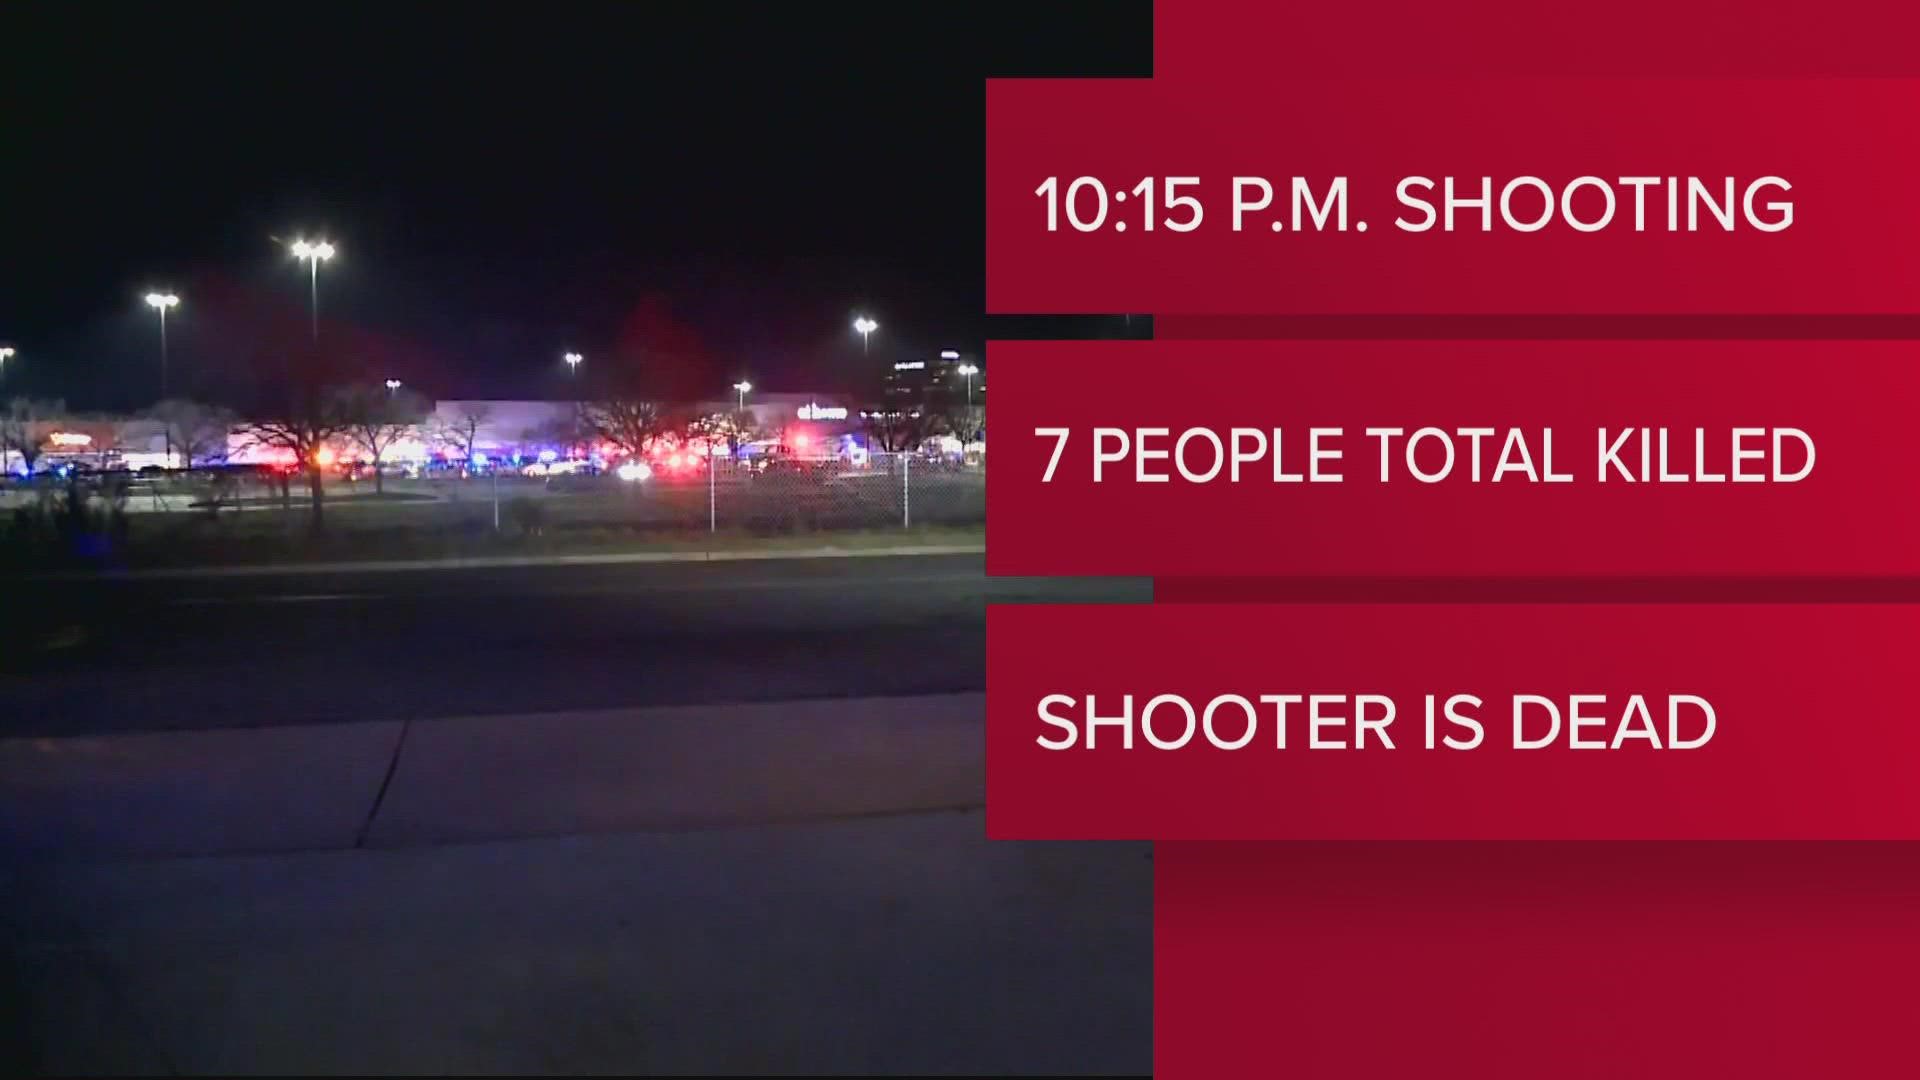 Here's what we know right now about the shooting investigation.